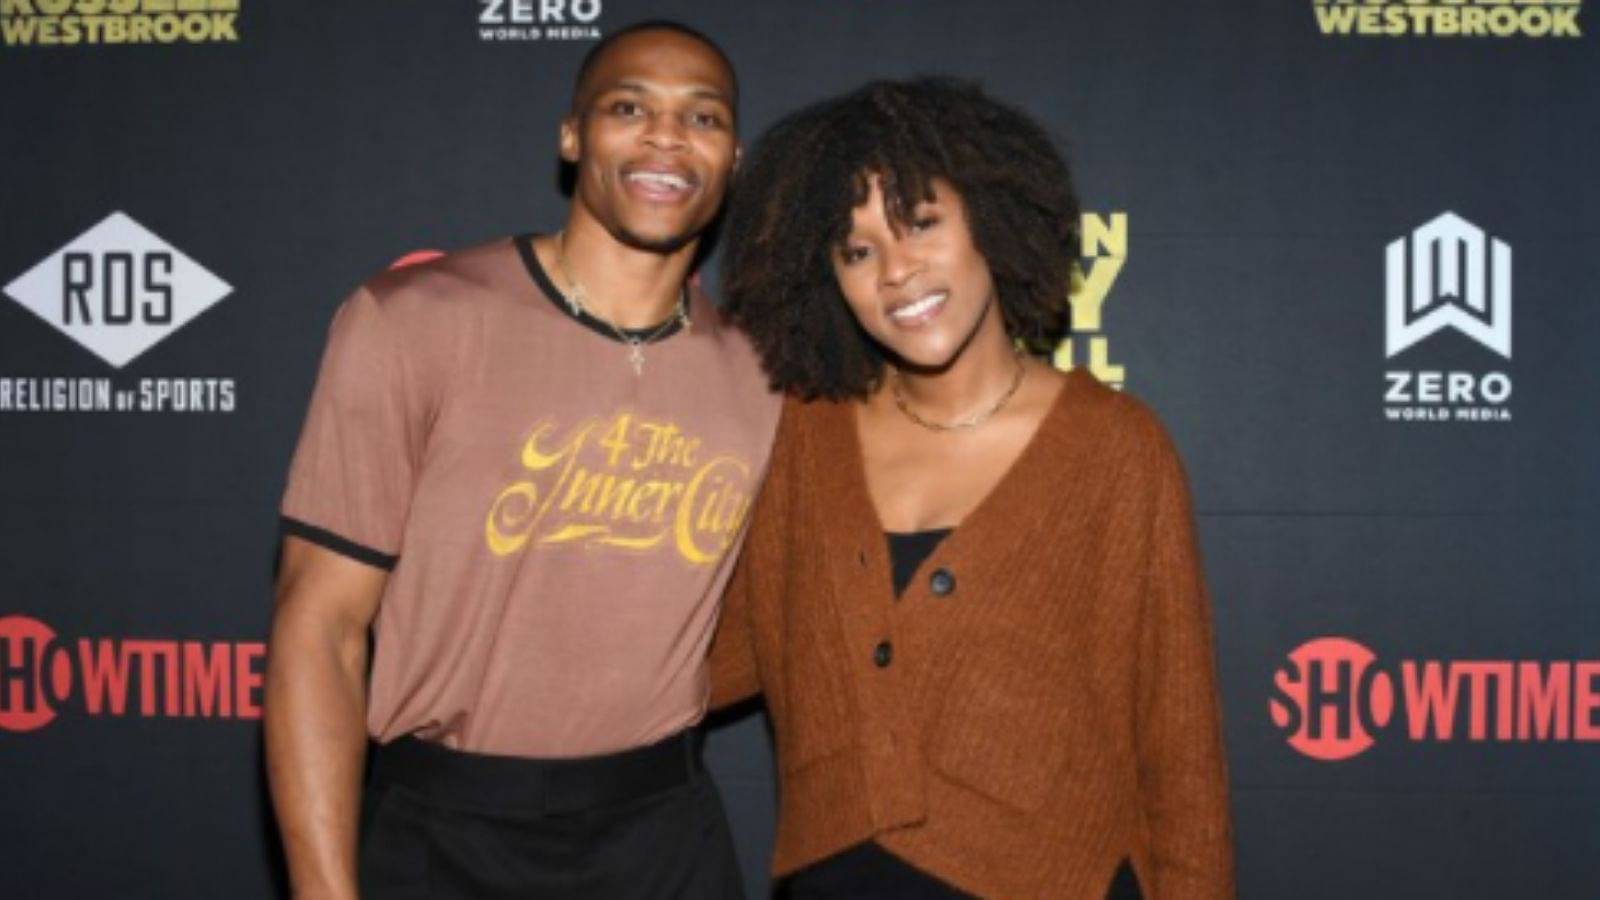 "Put Russell Westbrook on Orlando Magic, they make the playoffs": Nina Westbrook takes a shot at LeBron James and the Lakers agreeing with a reporter's take